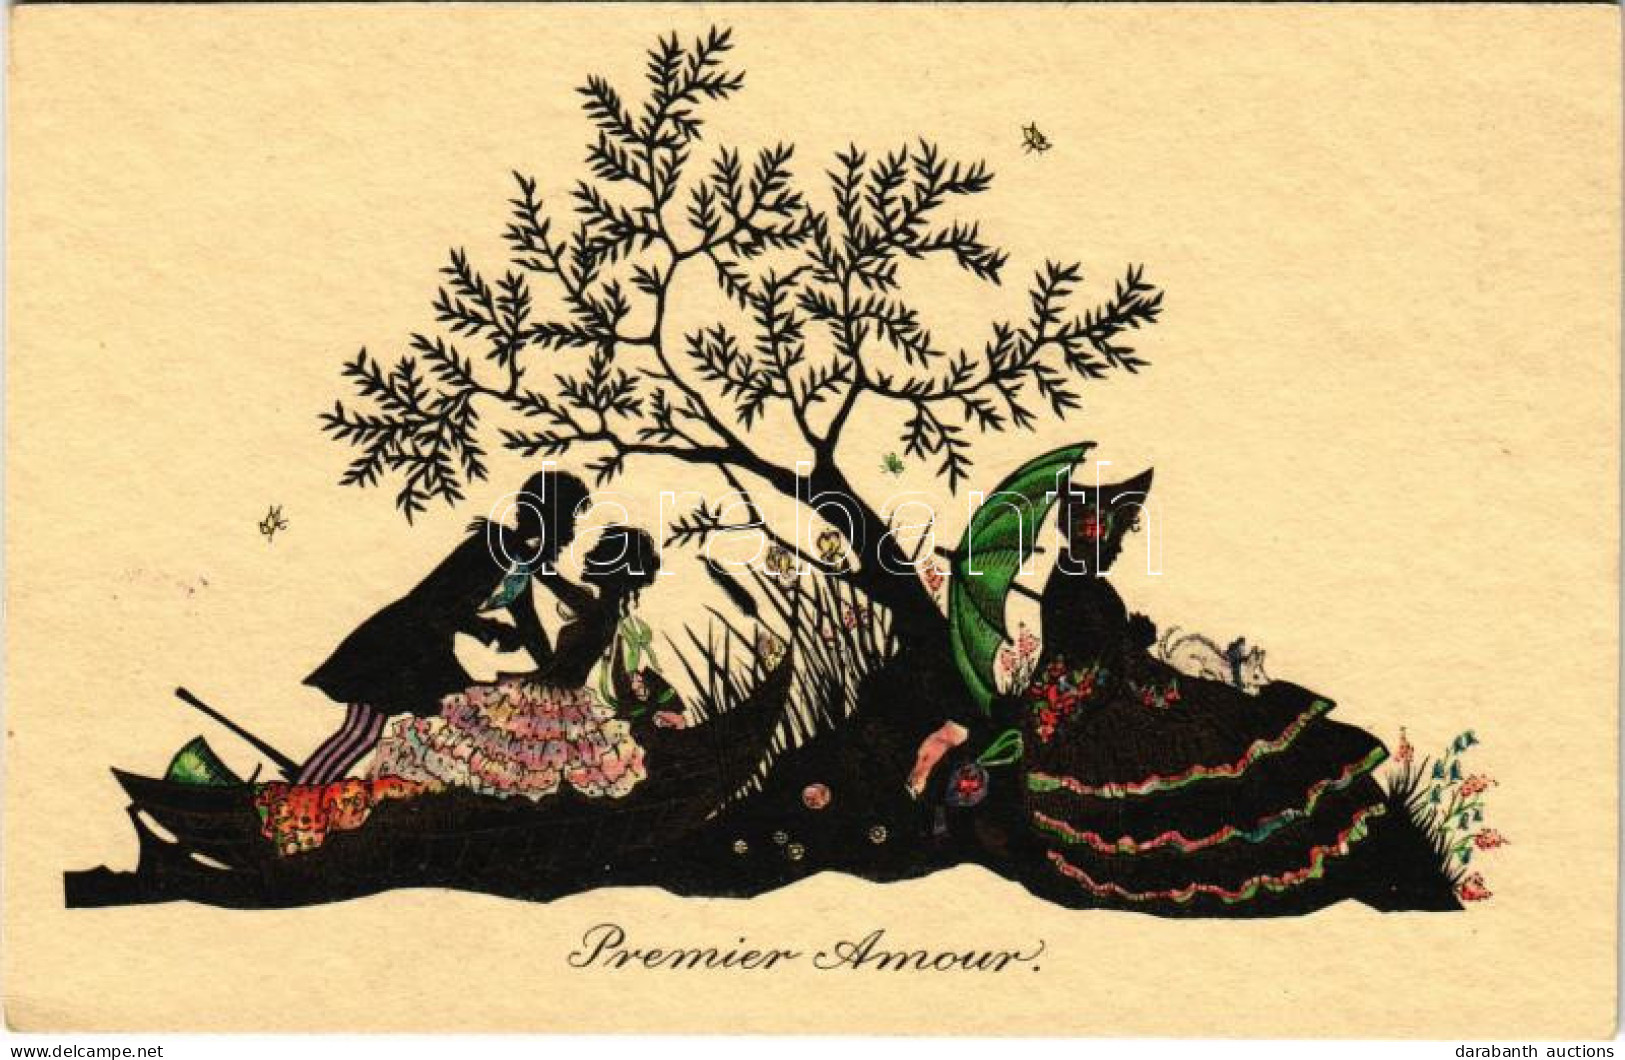 ** T2 Premier Amour / Romantic Silhouette Art Postcard With Couple, First Love. Primus W.L.B. No. 2103. - Ohne Zuordnung